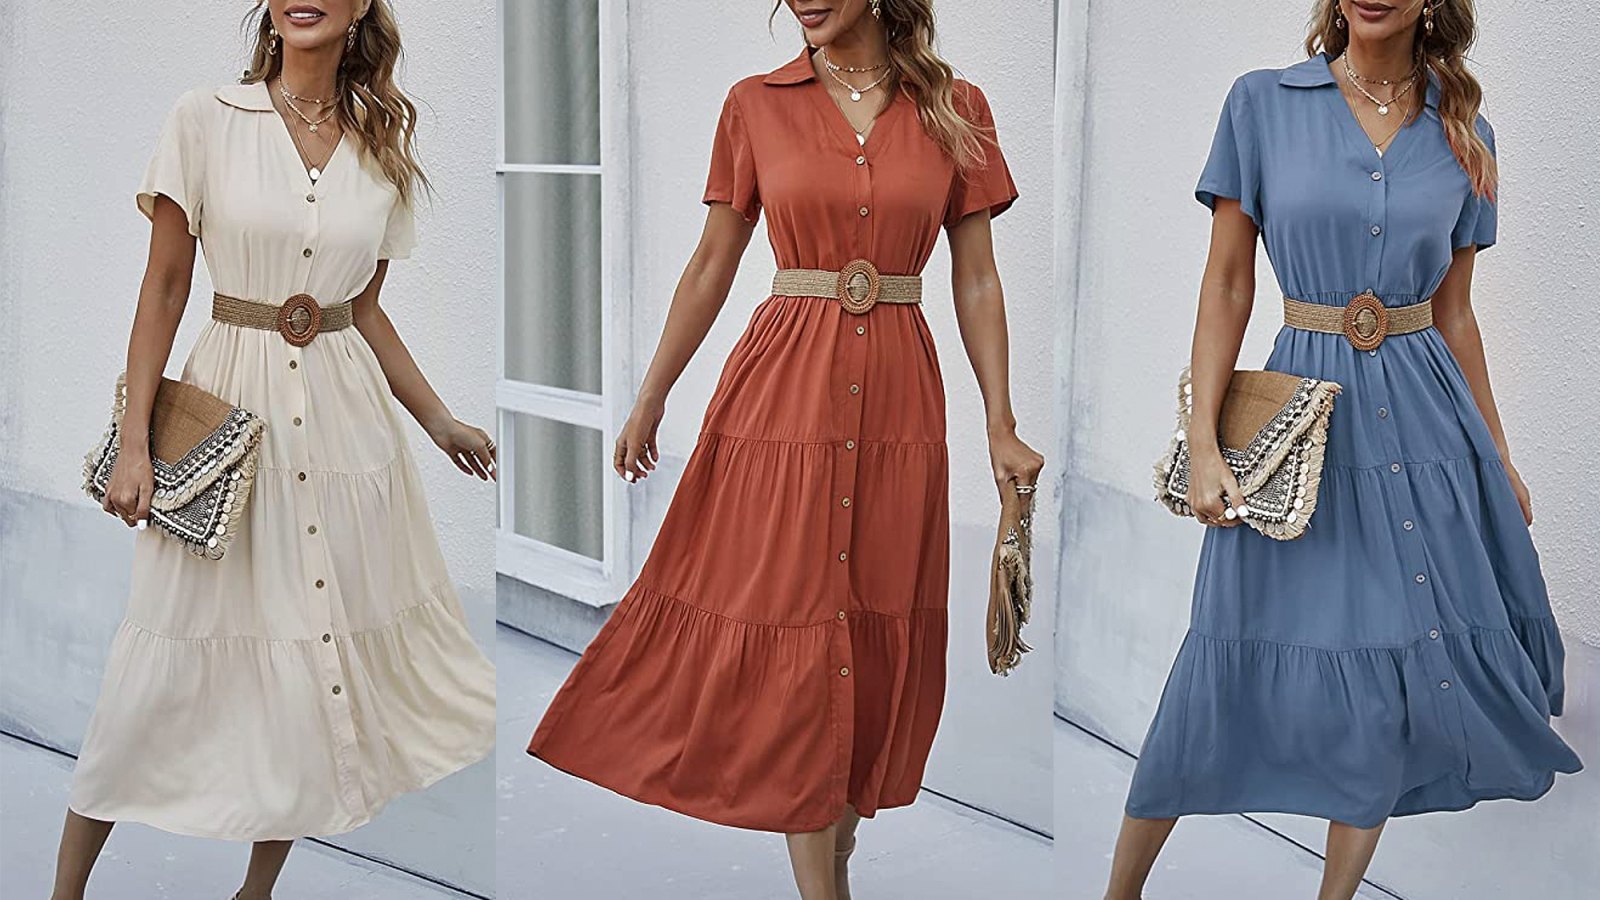 How to Style Belts With Dresses This Spring